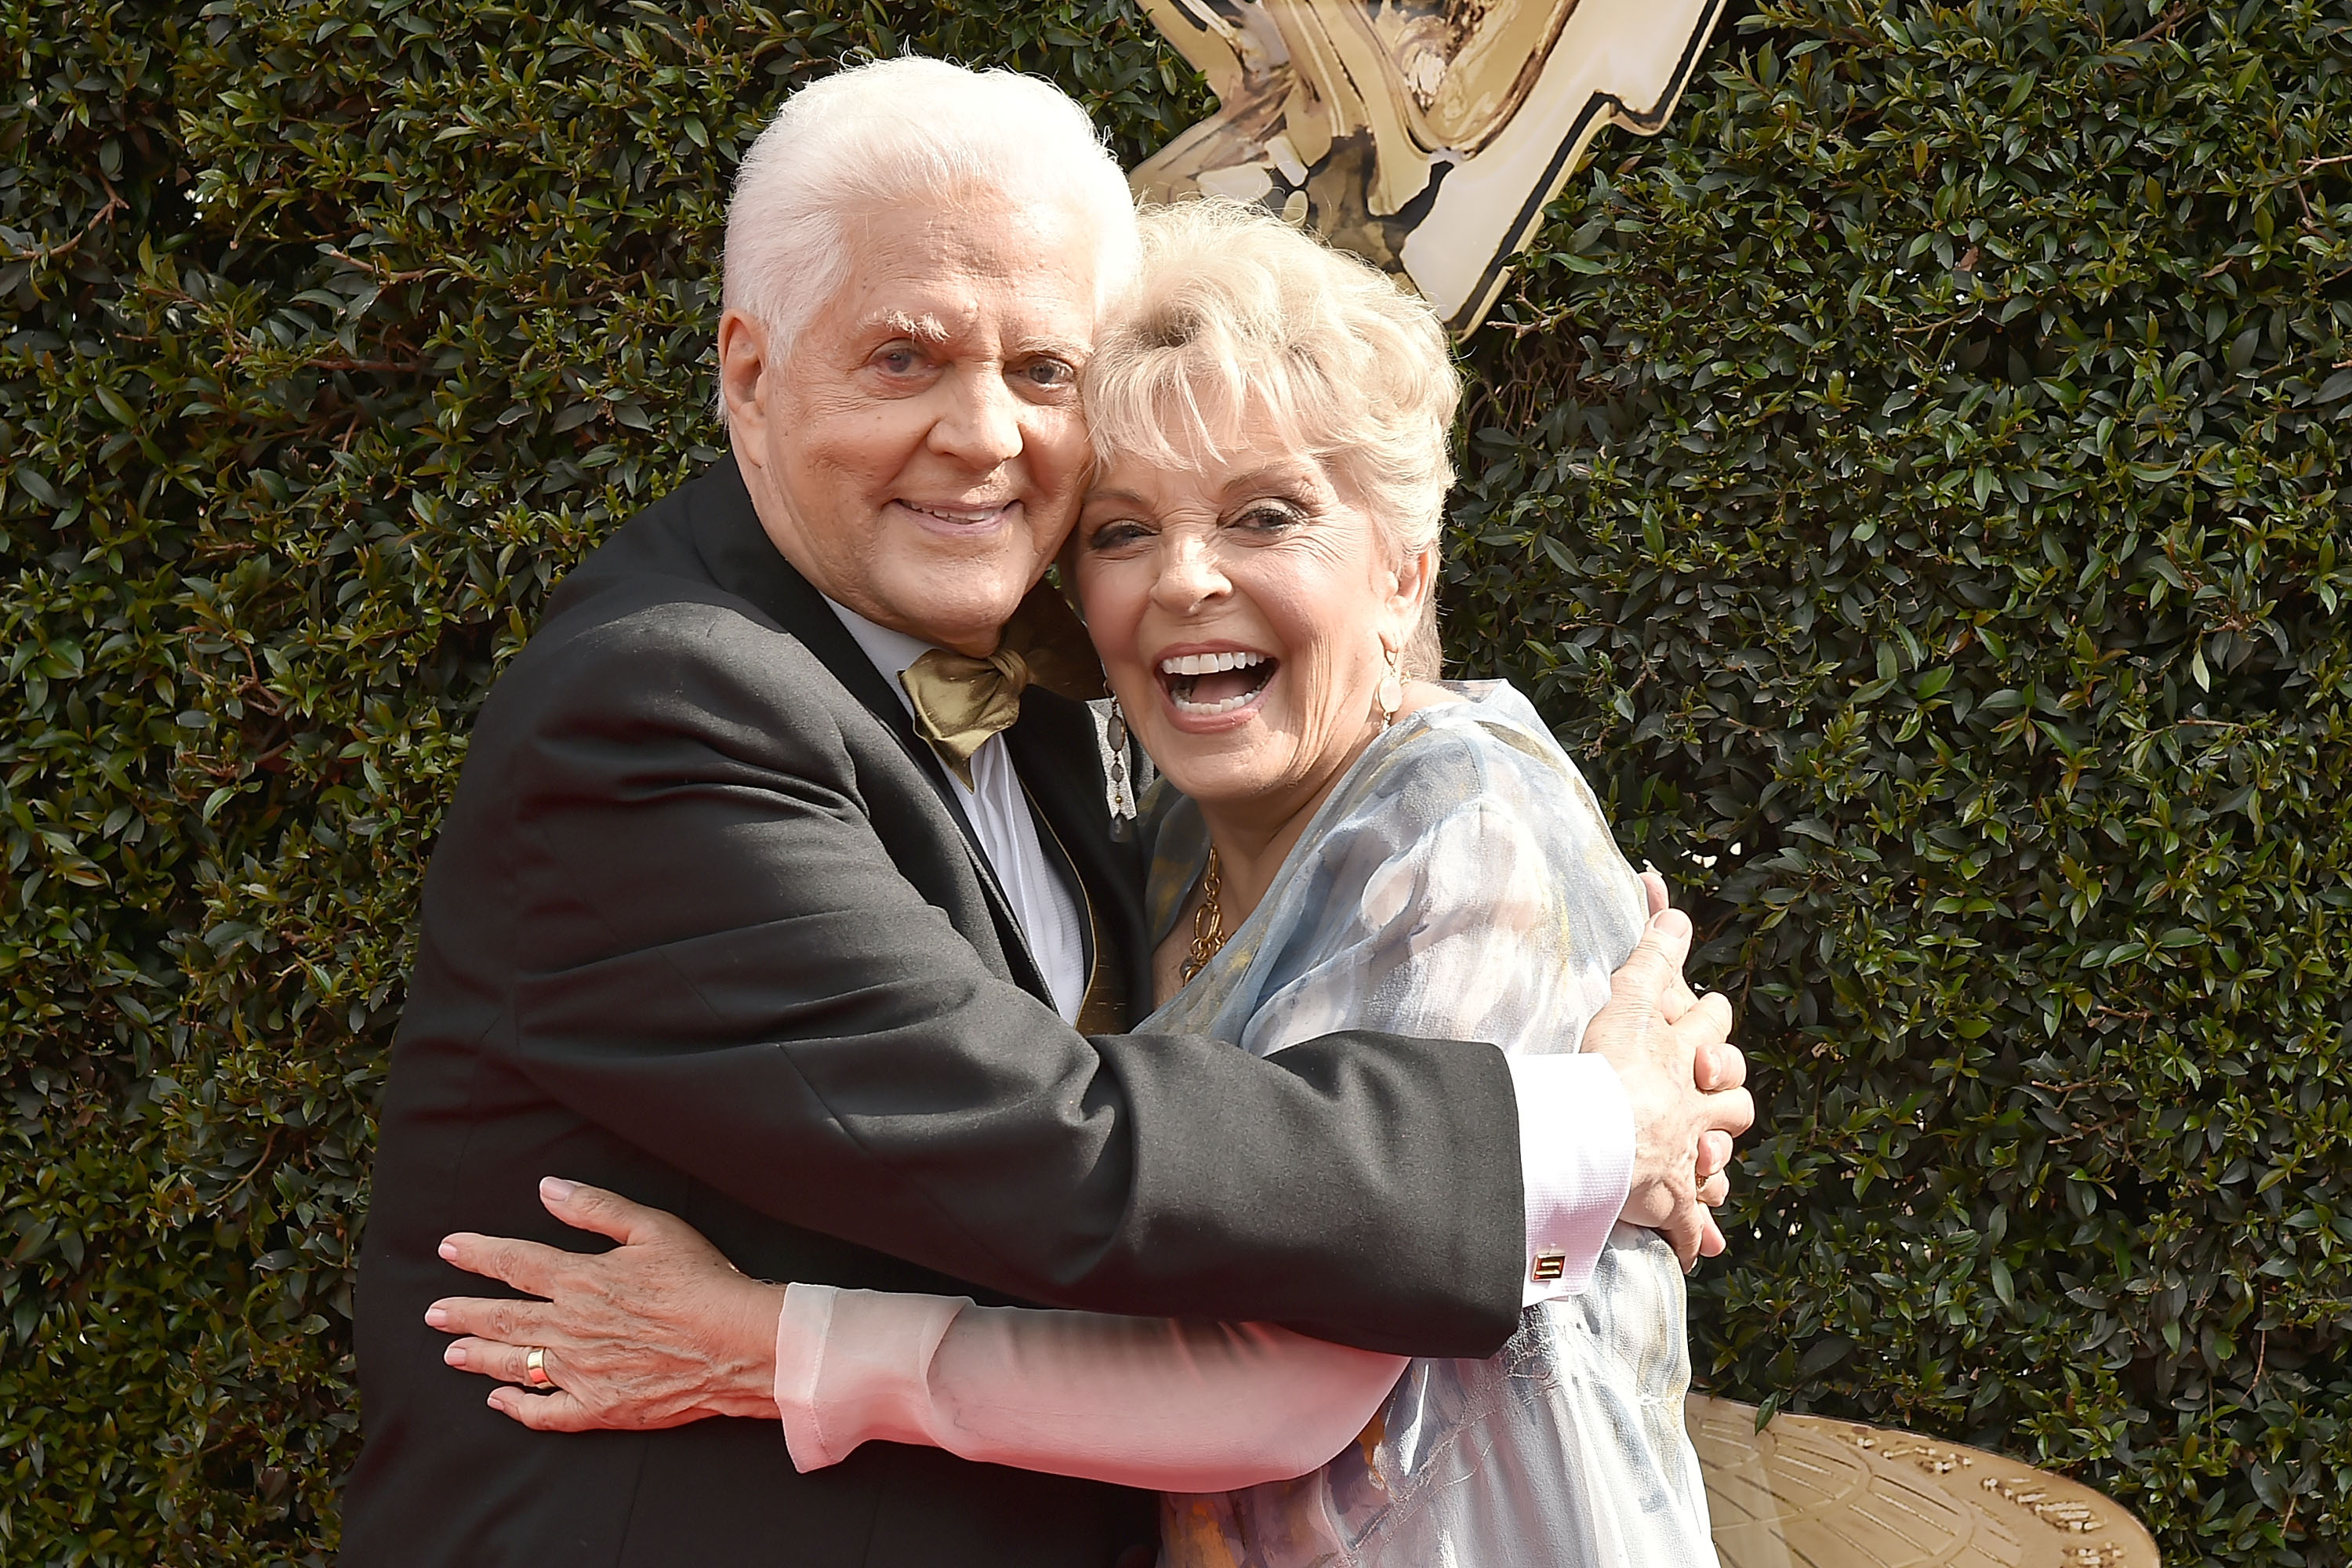 Bill Hayes and Susan Seaforth Hayes attend the 2018 Daytime Emmy Awards Arrivals at Pasadena Civic Auditorium on April 29, 2018 in Pasadena, California | Source: Getty Images